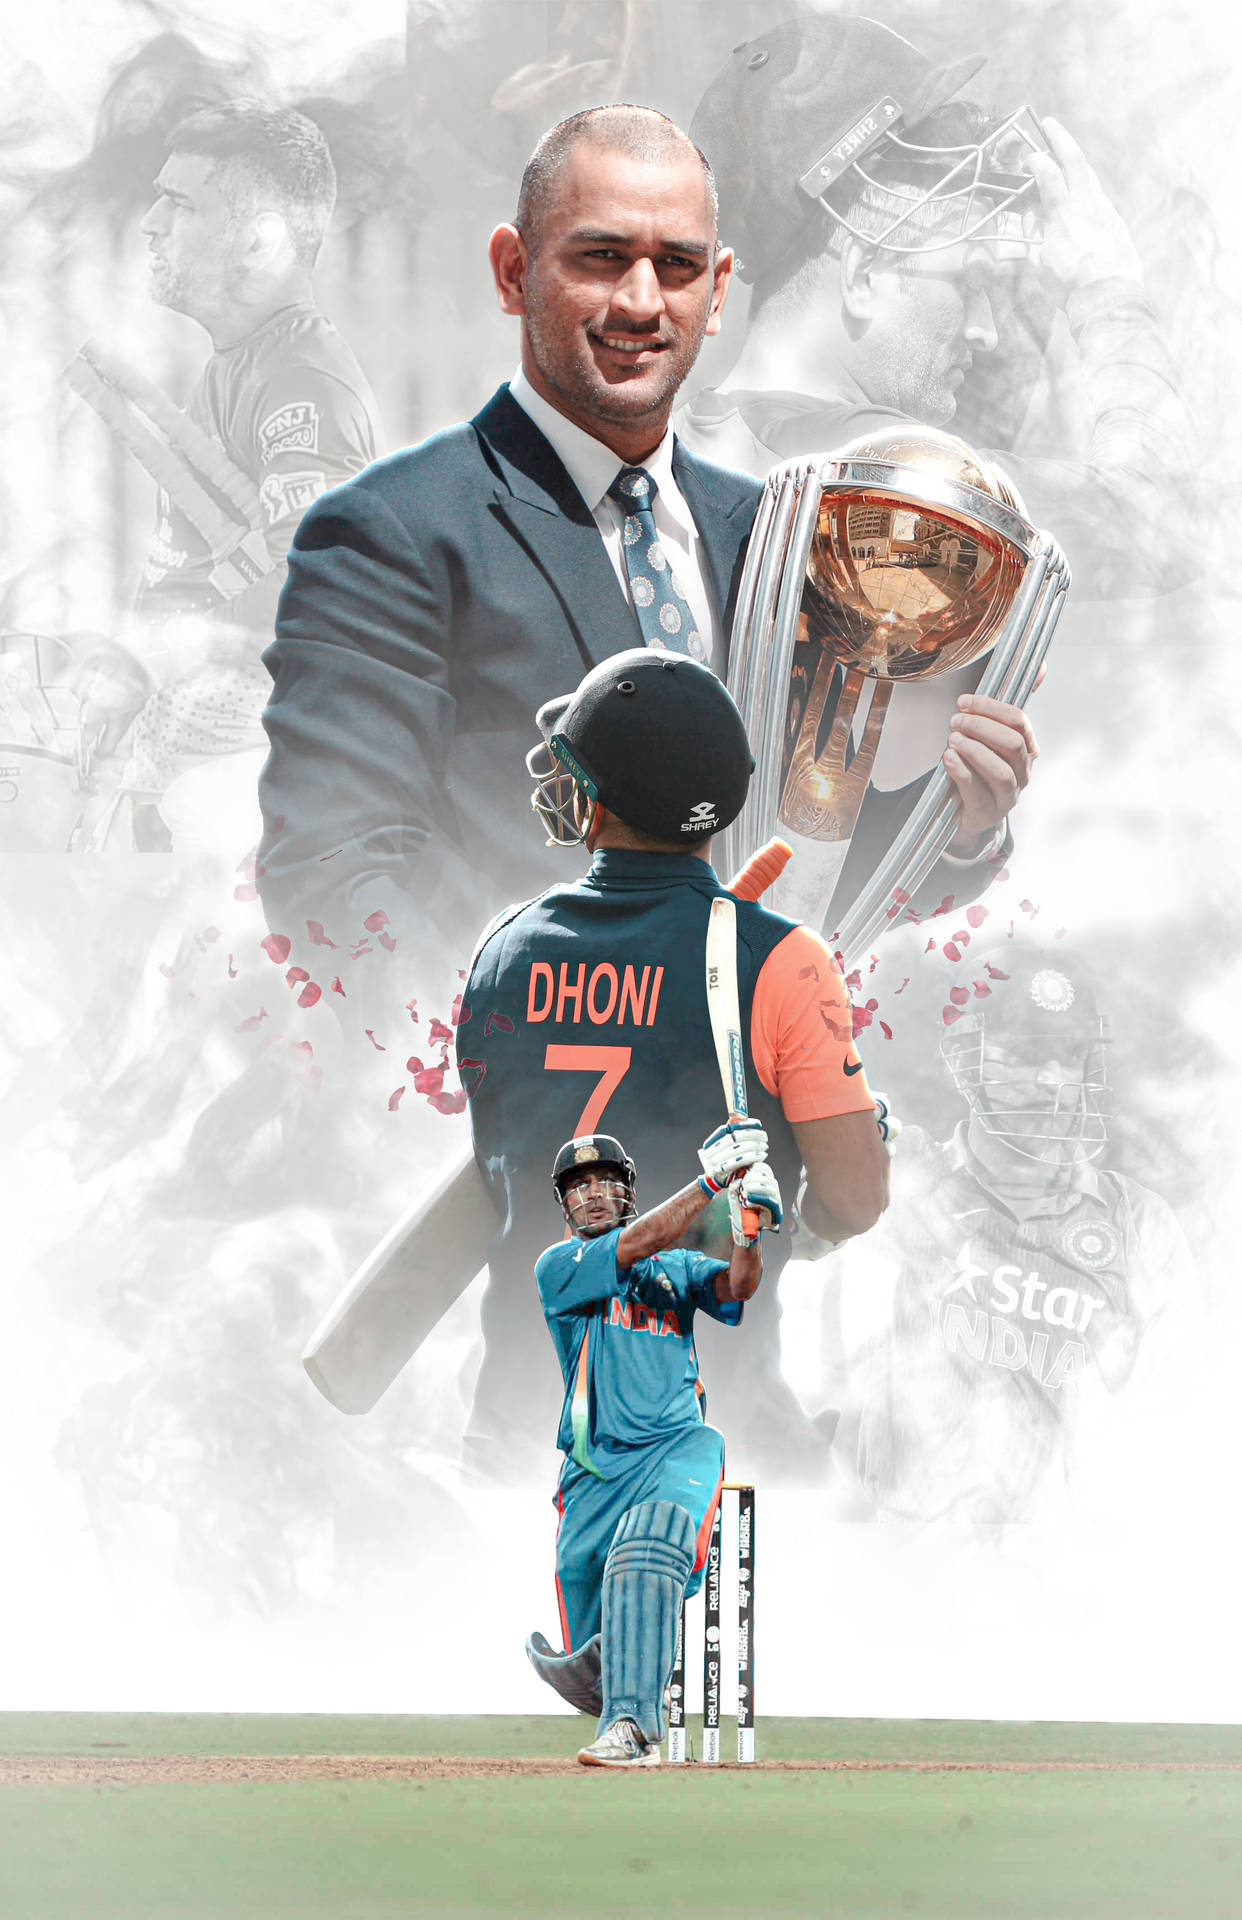 Icc World Cup Trophy Dhoni Hd Background